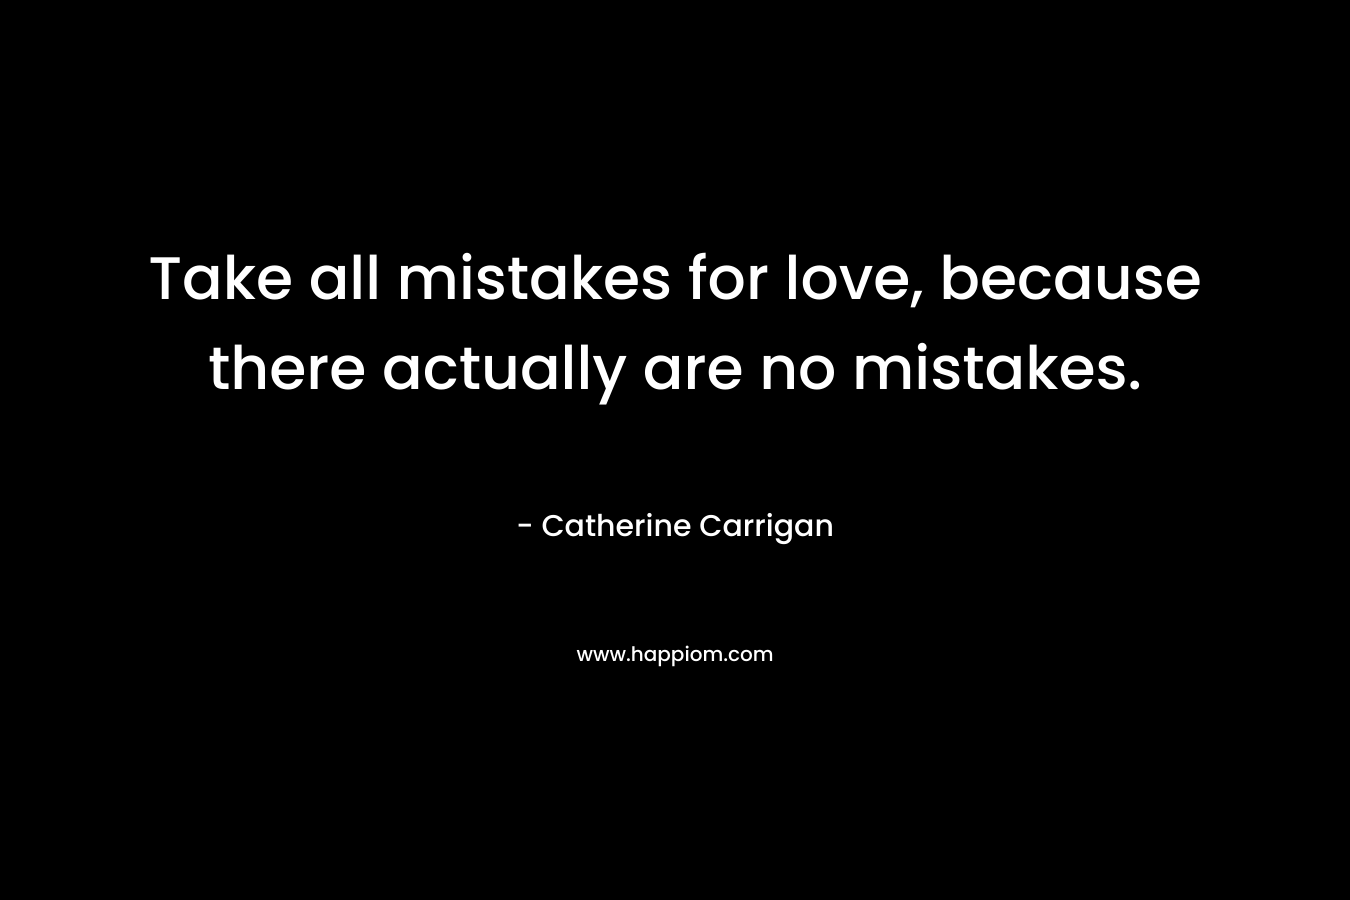 Take all mistakes for love, because there actually are no mistakes.